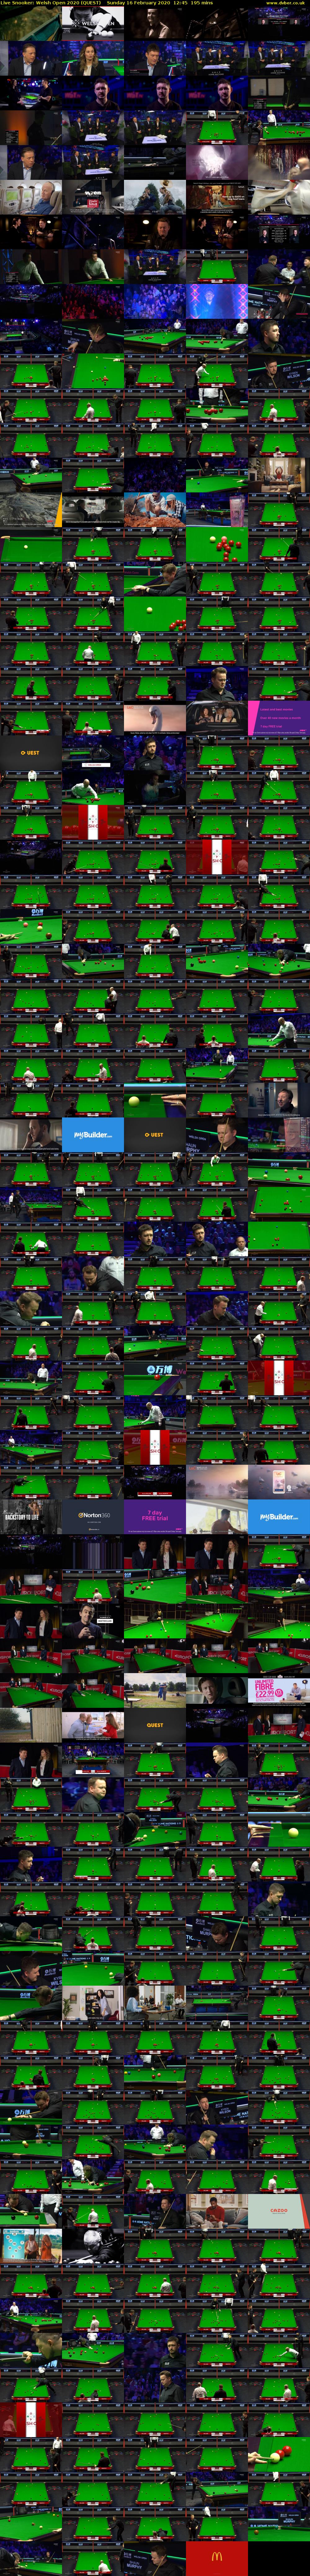 Live Snooker: Welsh Open 2020 (QUEST) Sunday 16 February 2020 12:45 - 16:00